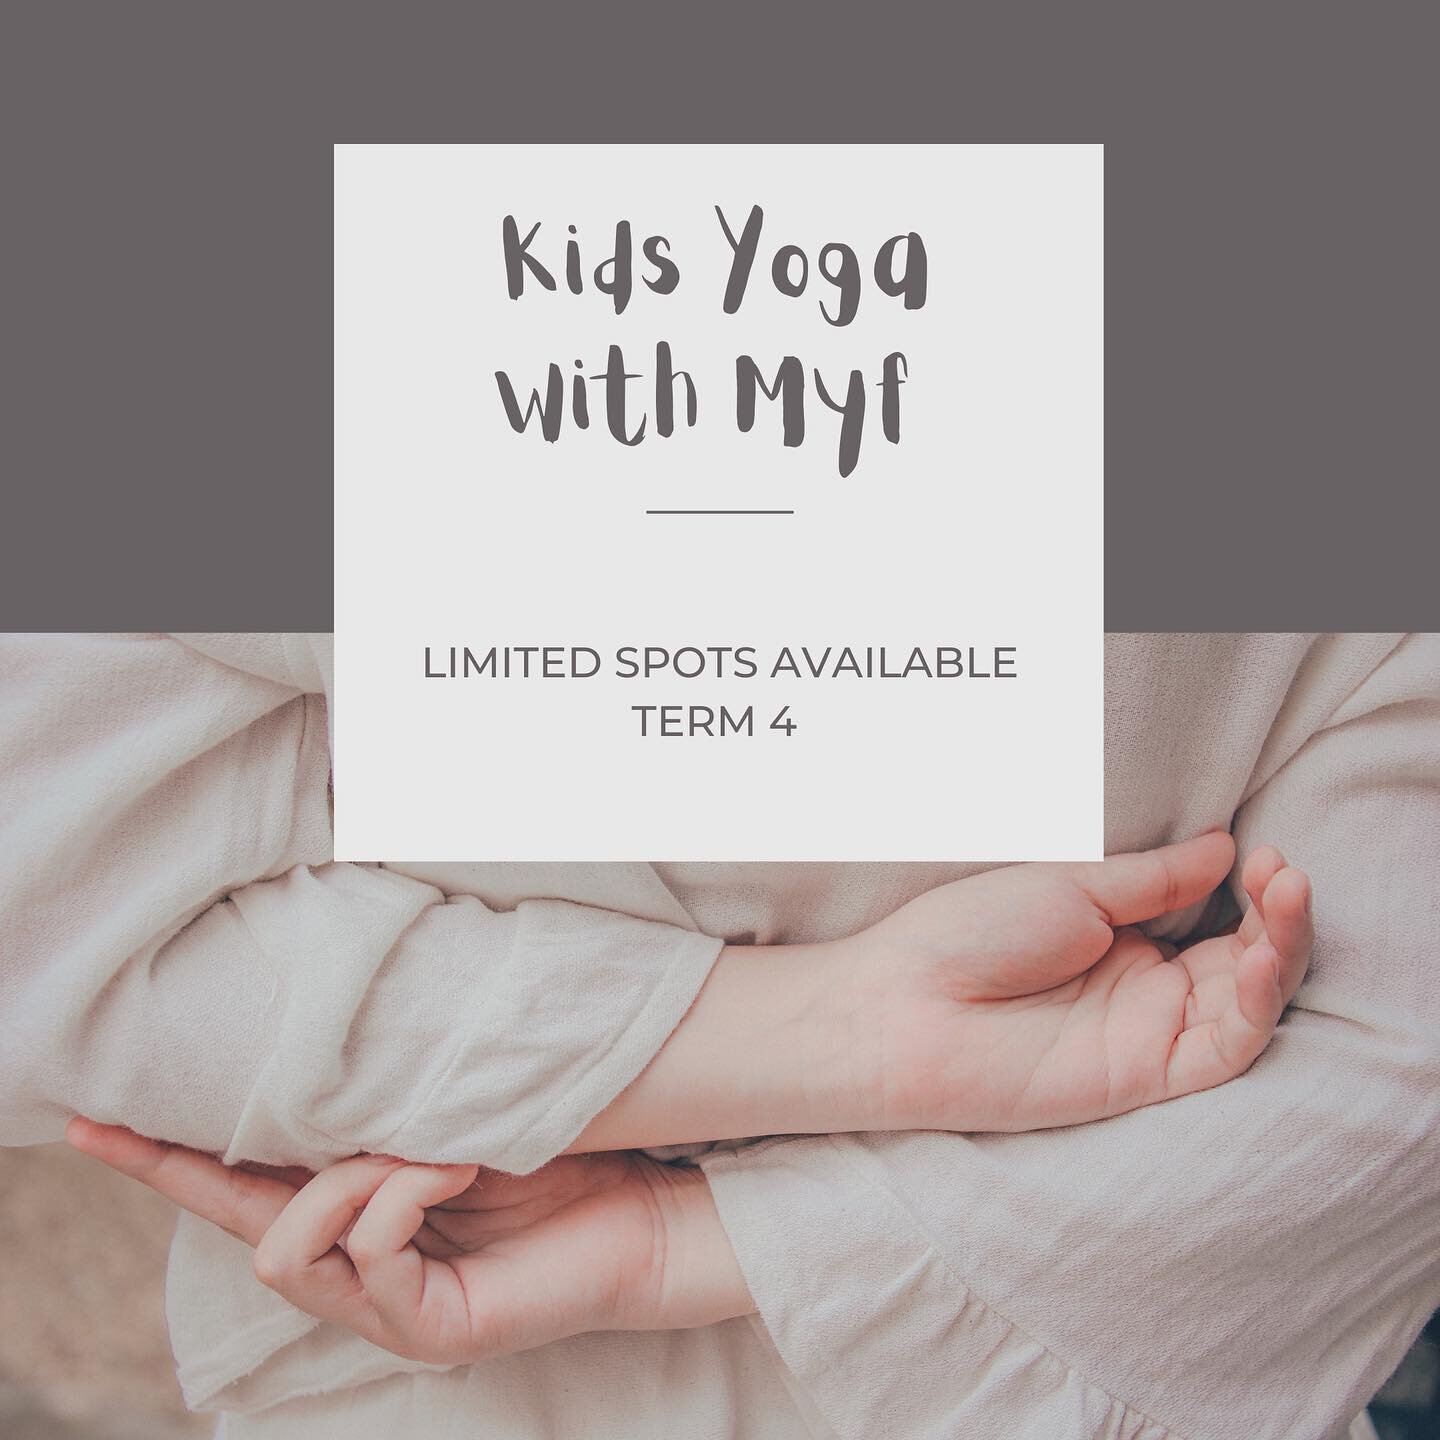 Yoga for kids is fun, teaches tools for life and can help with regulating emotions, sleep, coordination and much more! Click on the link in bio to check it out. WEDNESDAYs 4pm, term 4. South Hobart. Email directly or via website to enquire or book. m